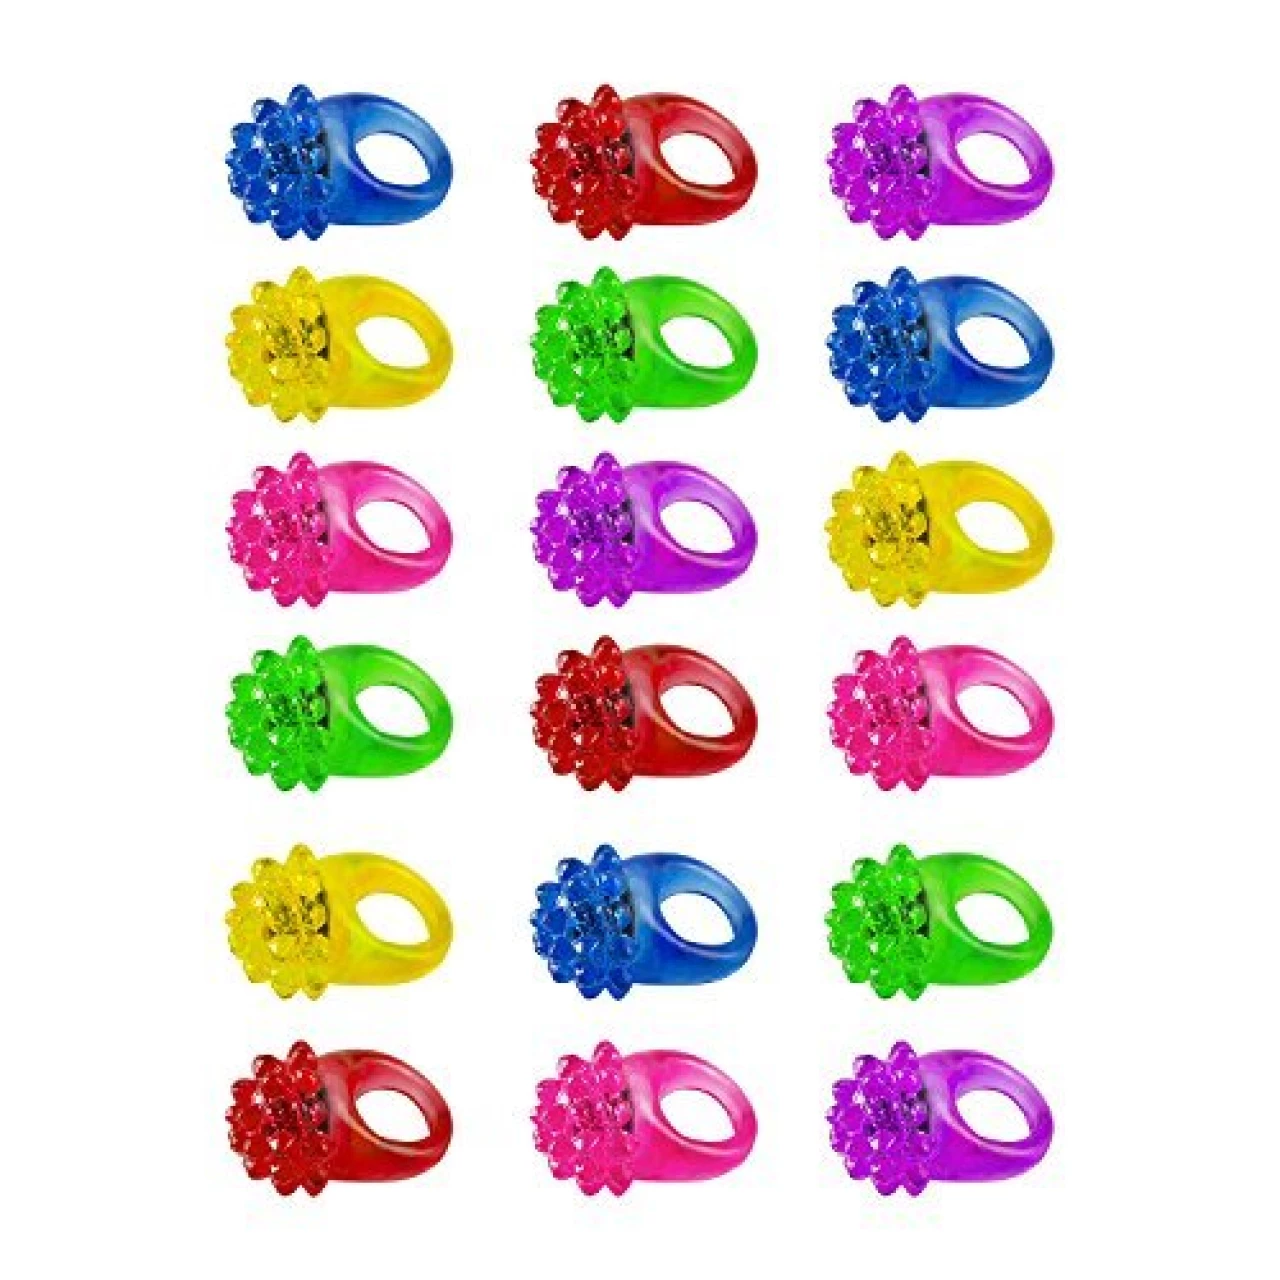 Super Z Outlet Flashing LED Light Up Bumpy Jelly Rubber Rings